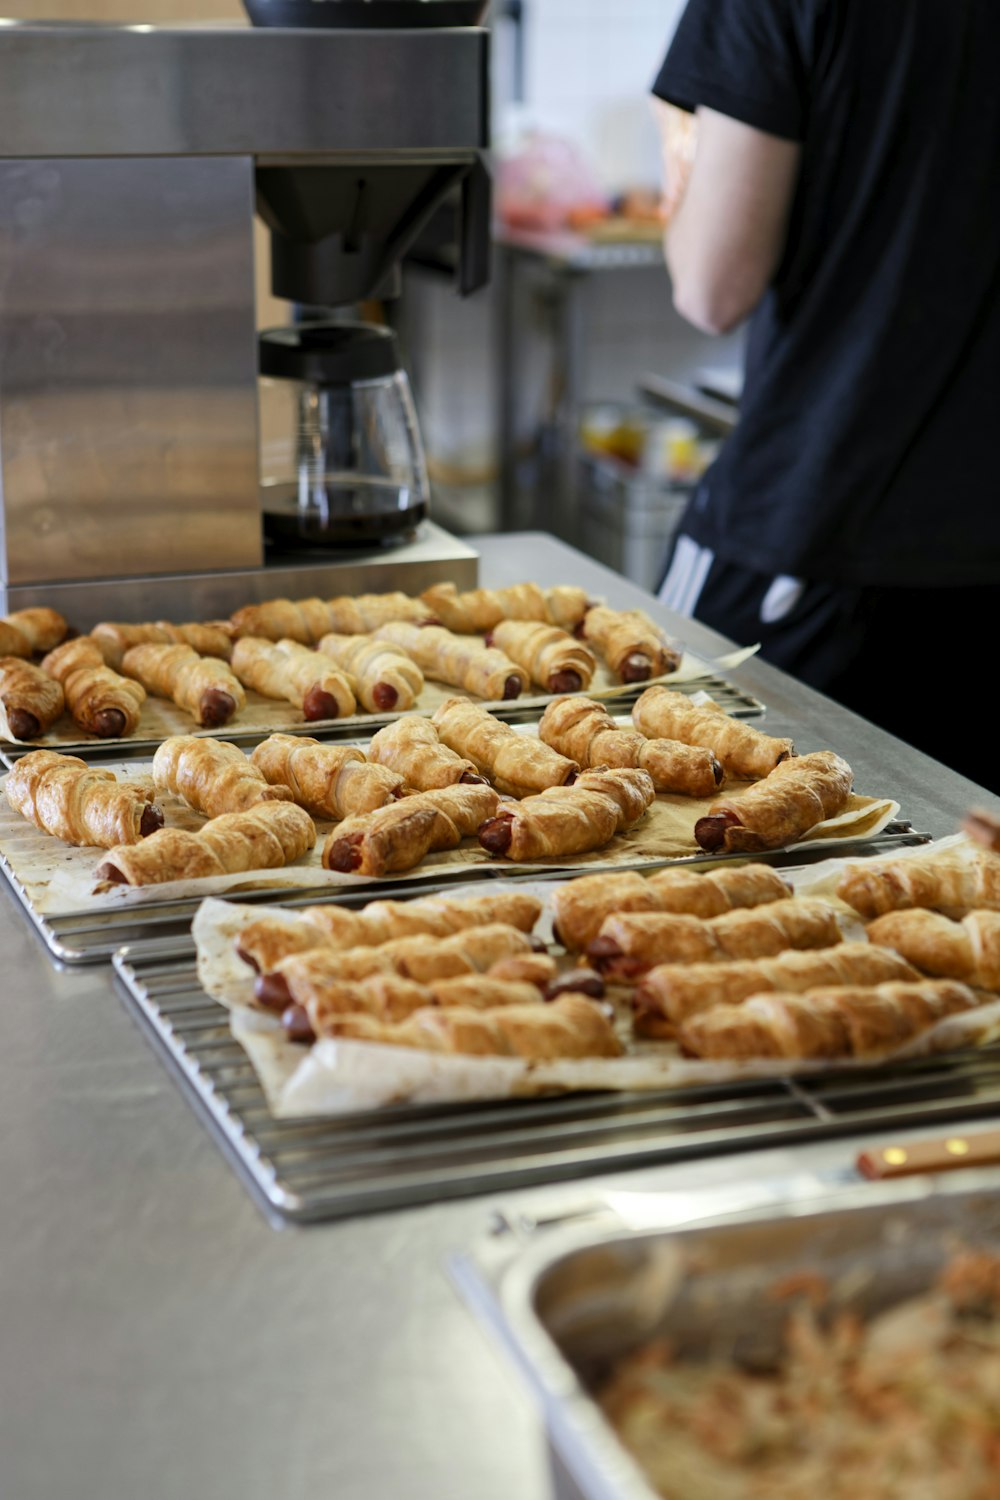 several trays of pastries are lined up on a counter